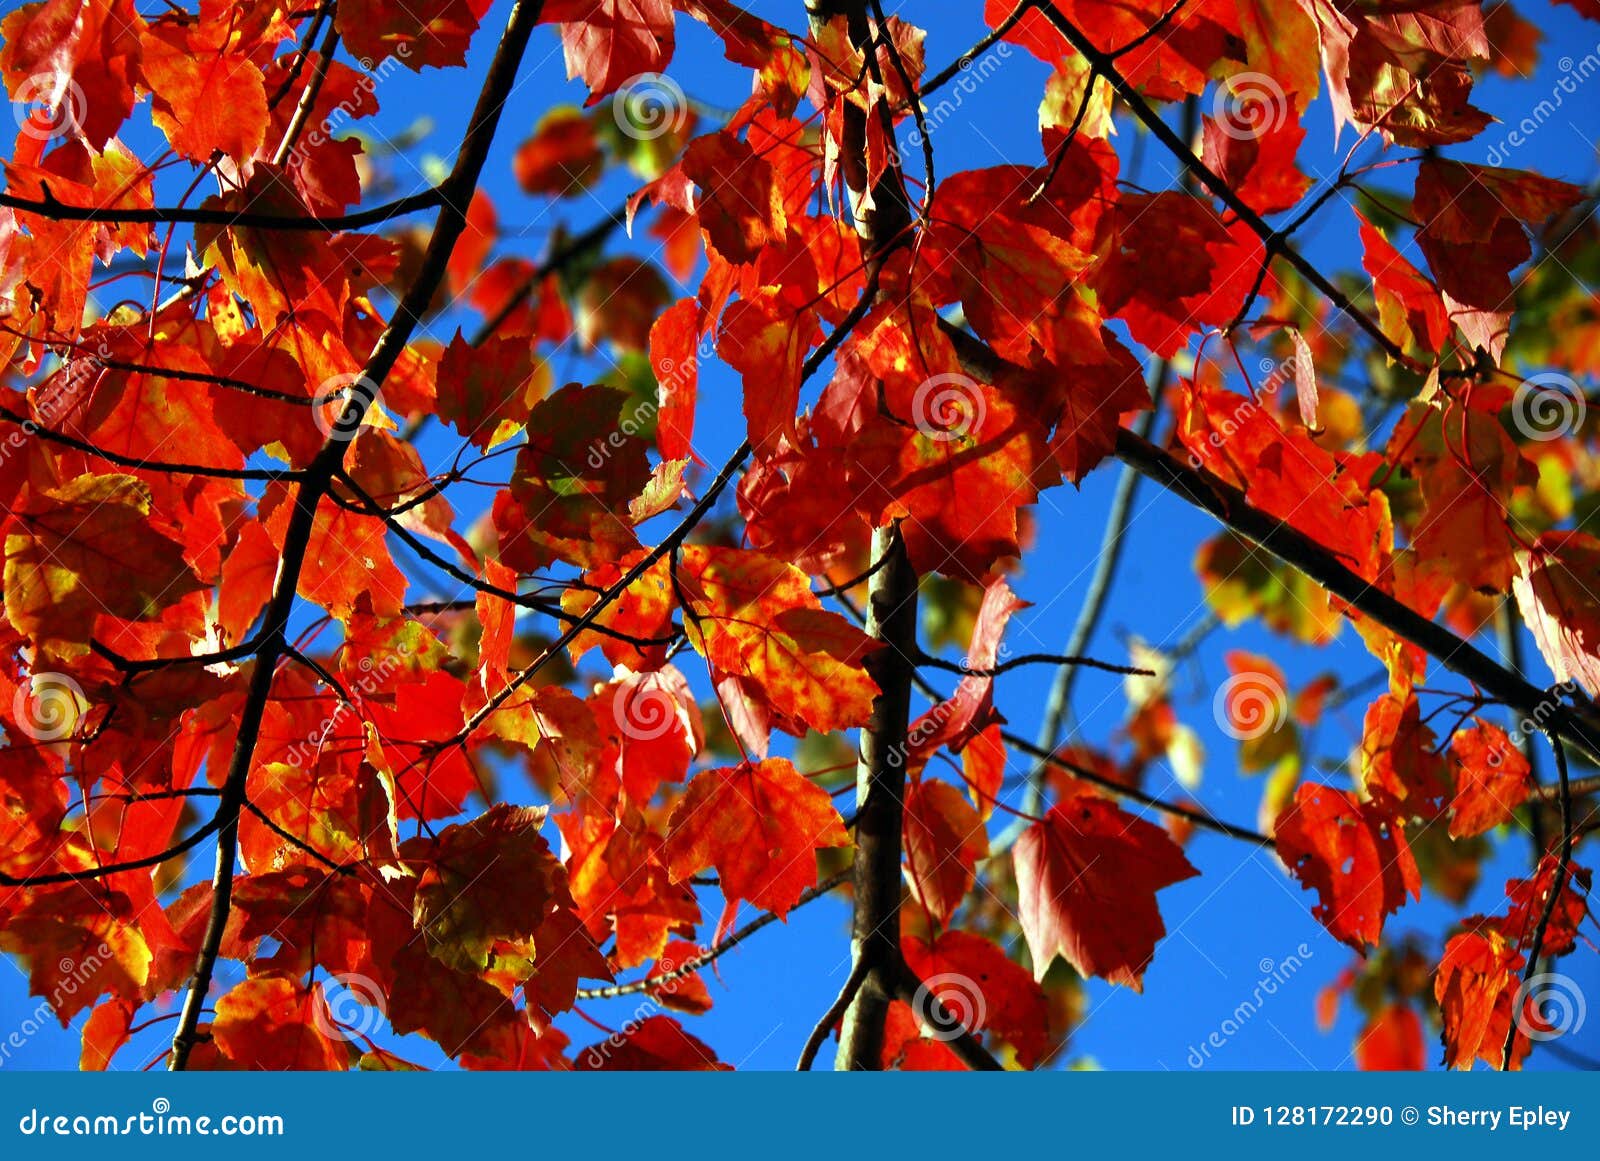 Autumn Fall Bright Red Maple Leaves Against A Blue Sky Stock Photo